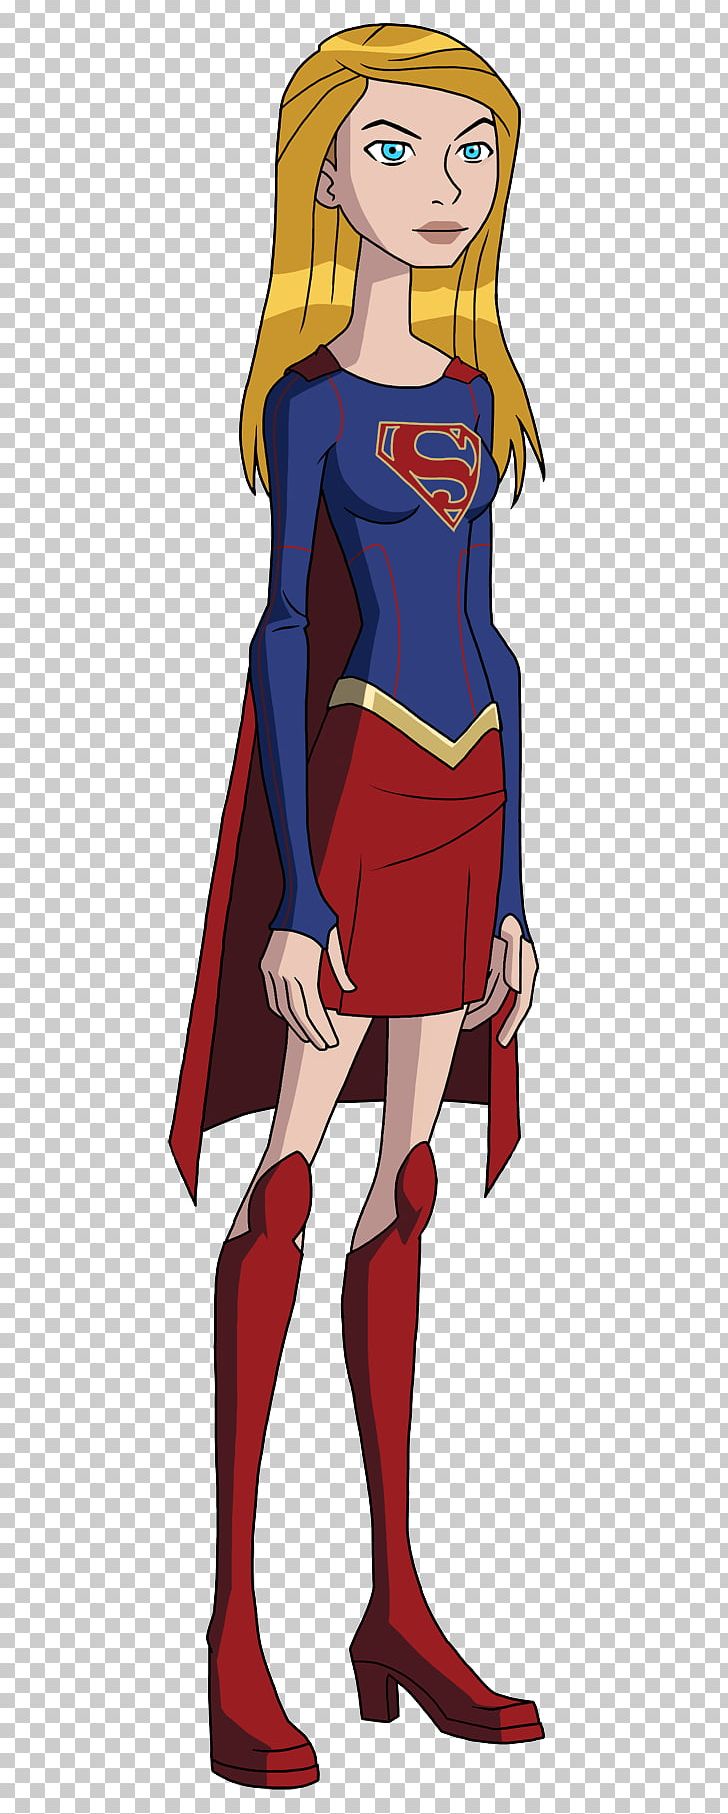 Superhero Shoe PNG, Clipart, Anime, Art, Cartoon, Clothing, Costume Free PNG Download